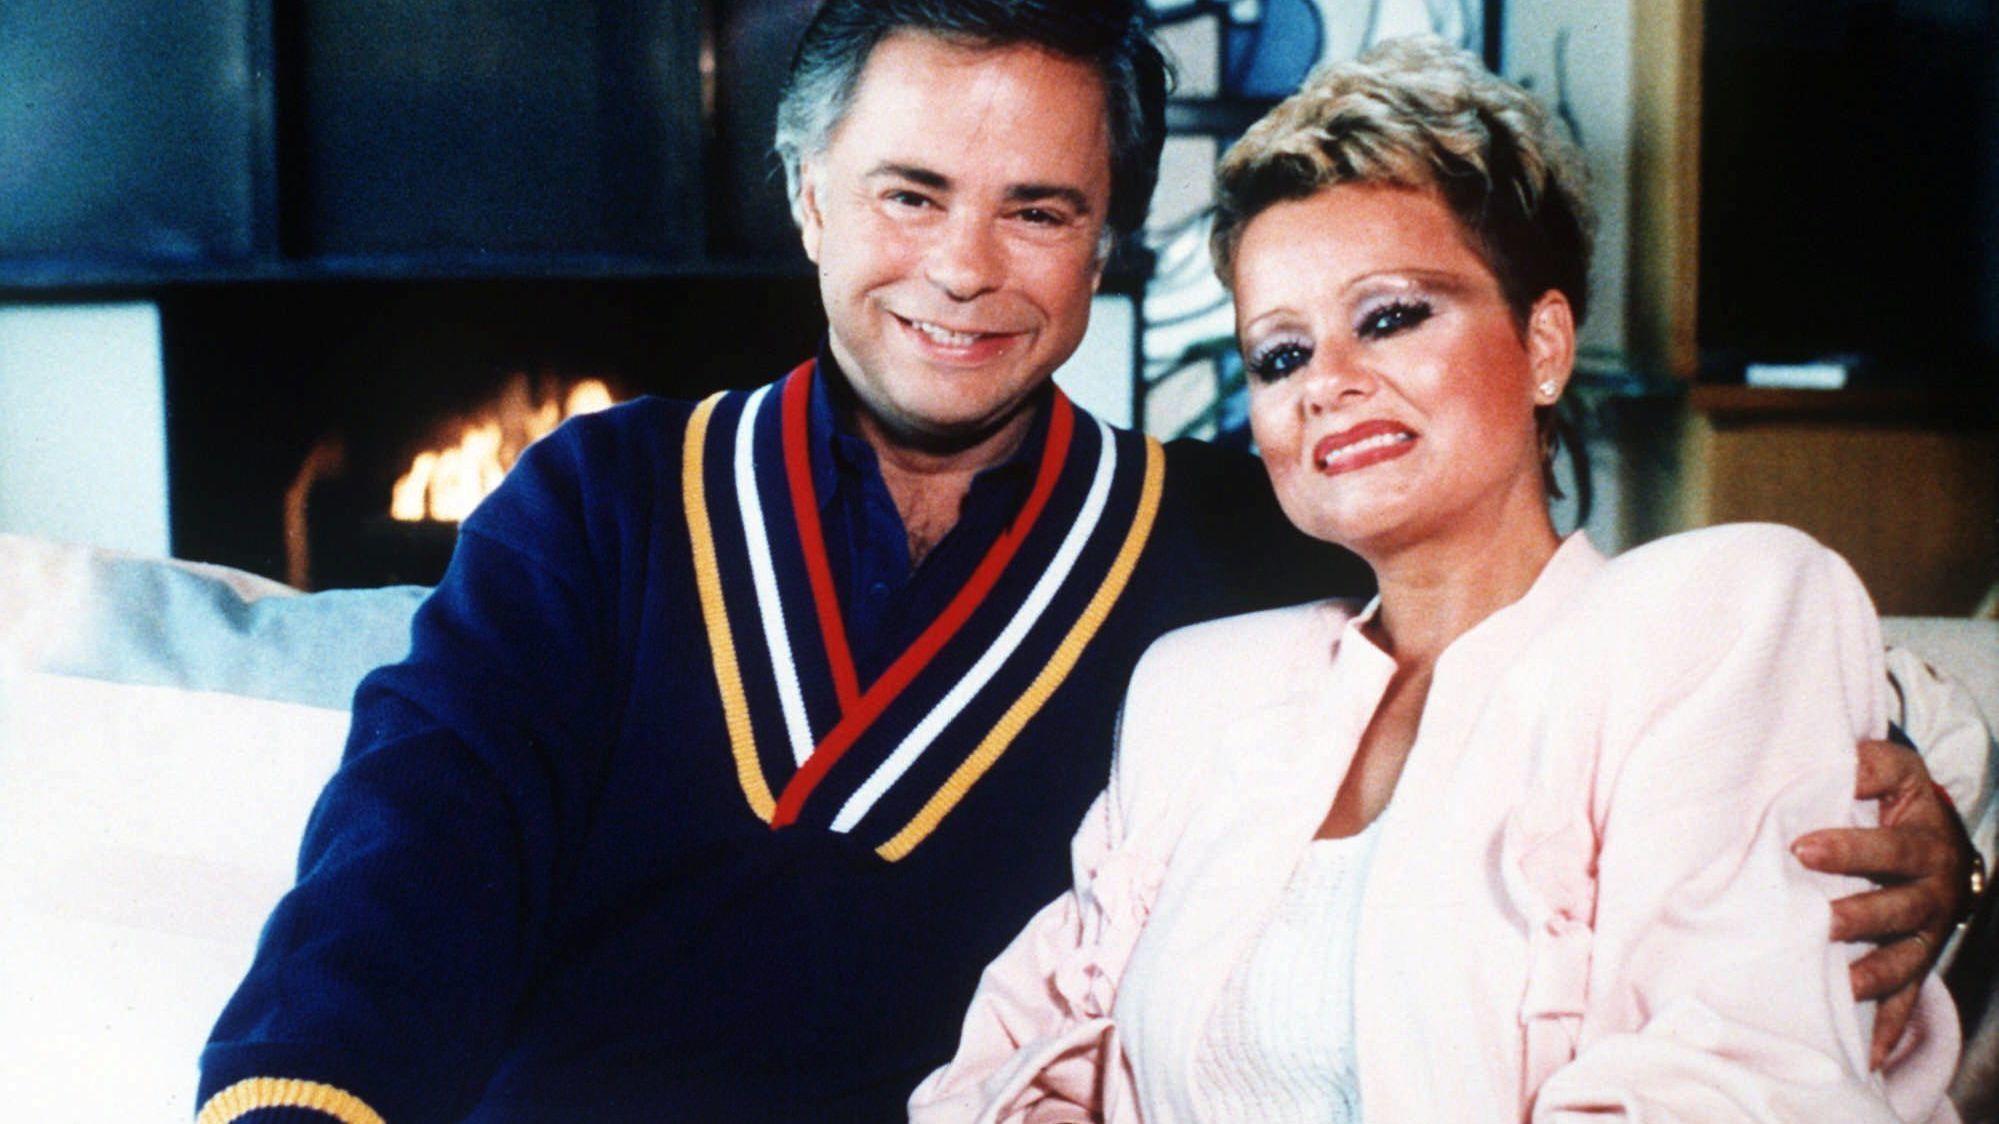 The trials and resilience of Tammy Faye Bakker